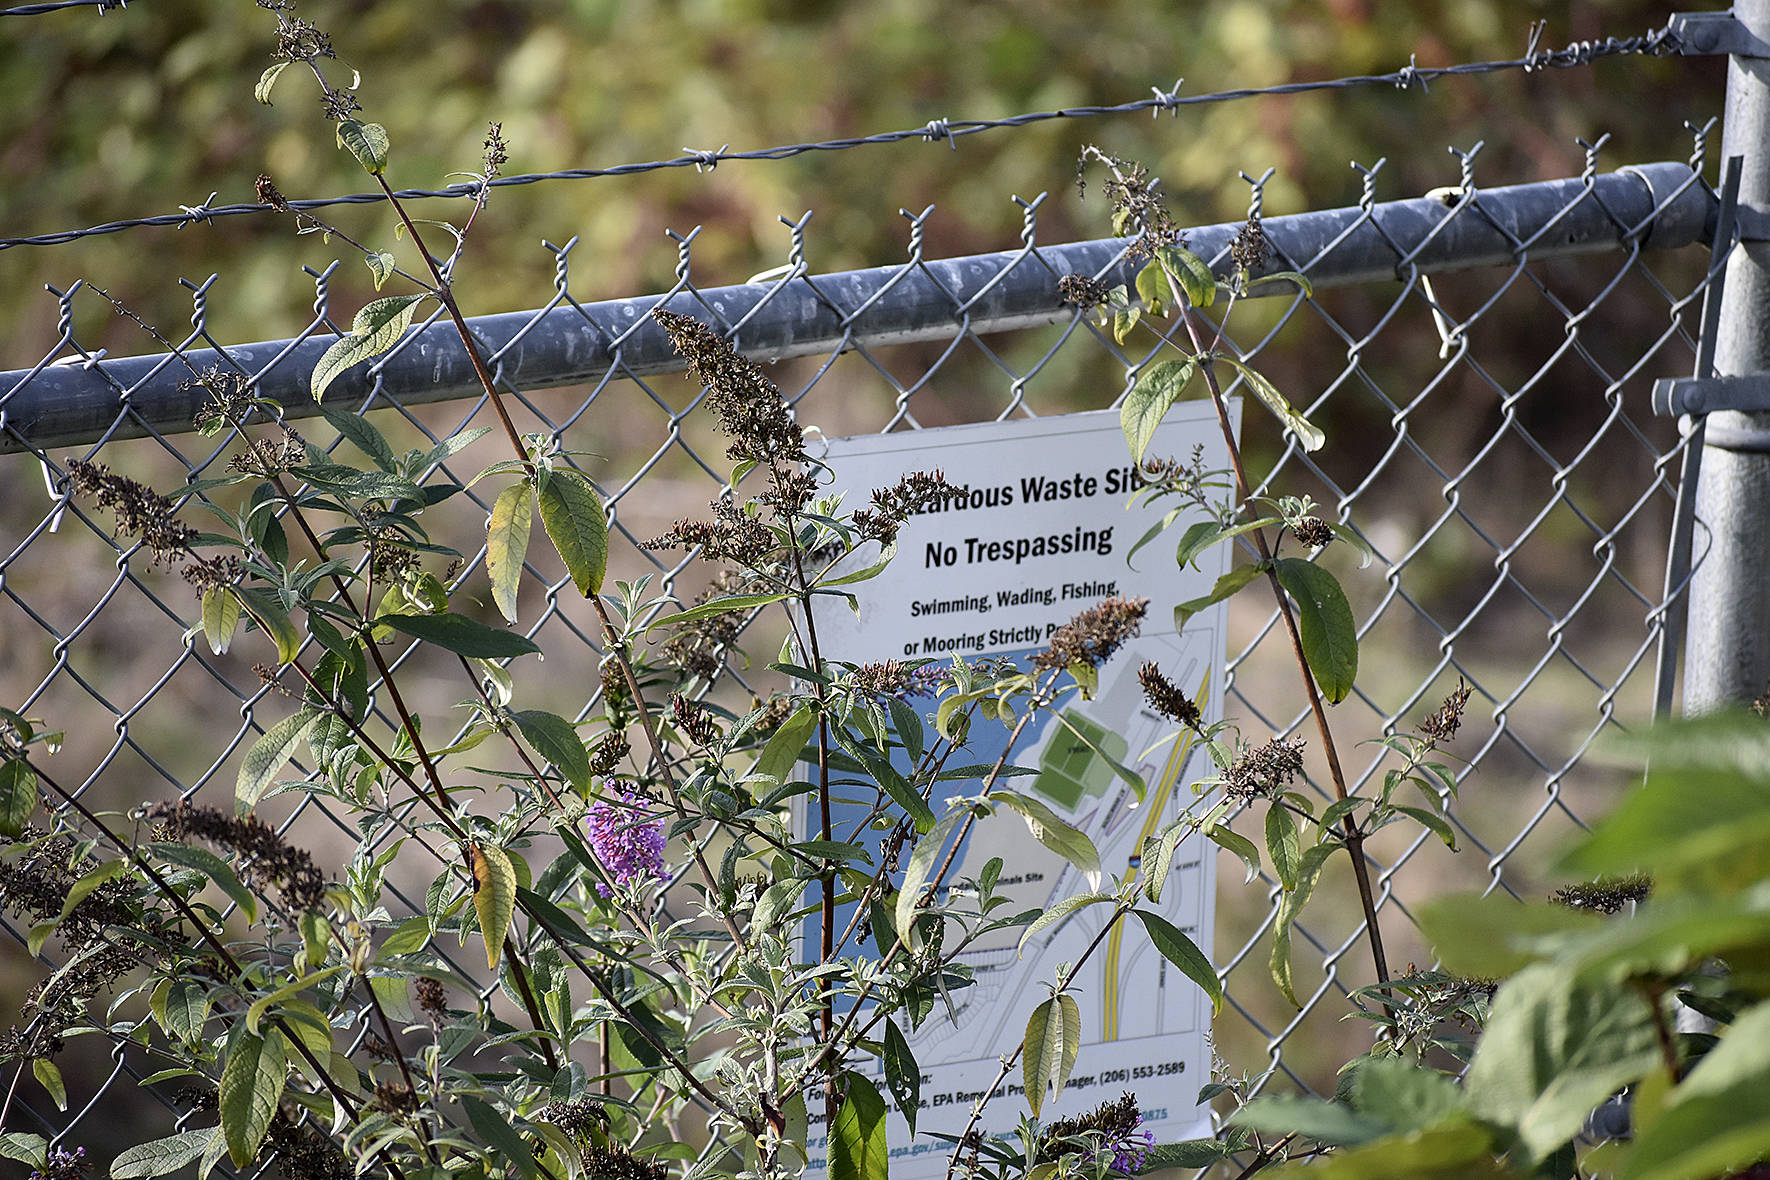 The Quendall Terminals site is fenced off and signage warns folks from approaching. But property owners and EPA want to clean it up and making it livable, shopable, enjoyable Lake Washington waterfront property. Staff photo 2019/Haley Ausbun